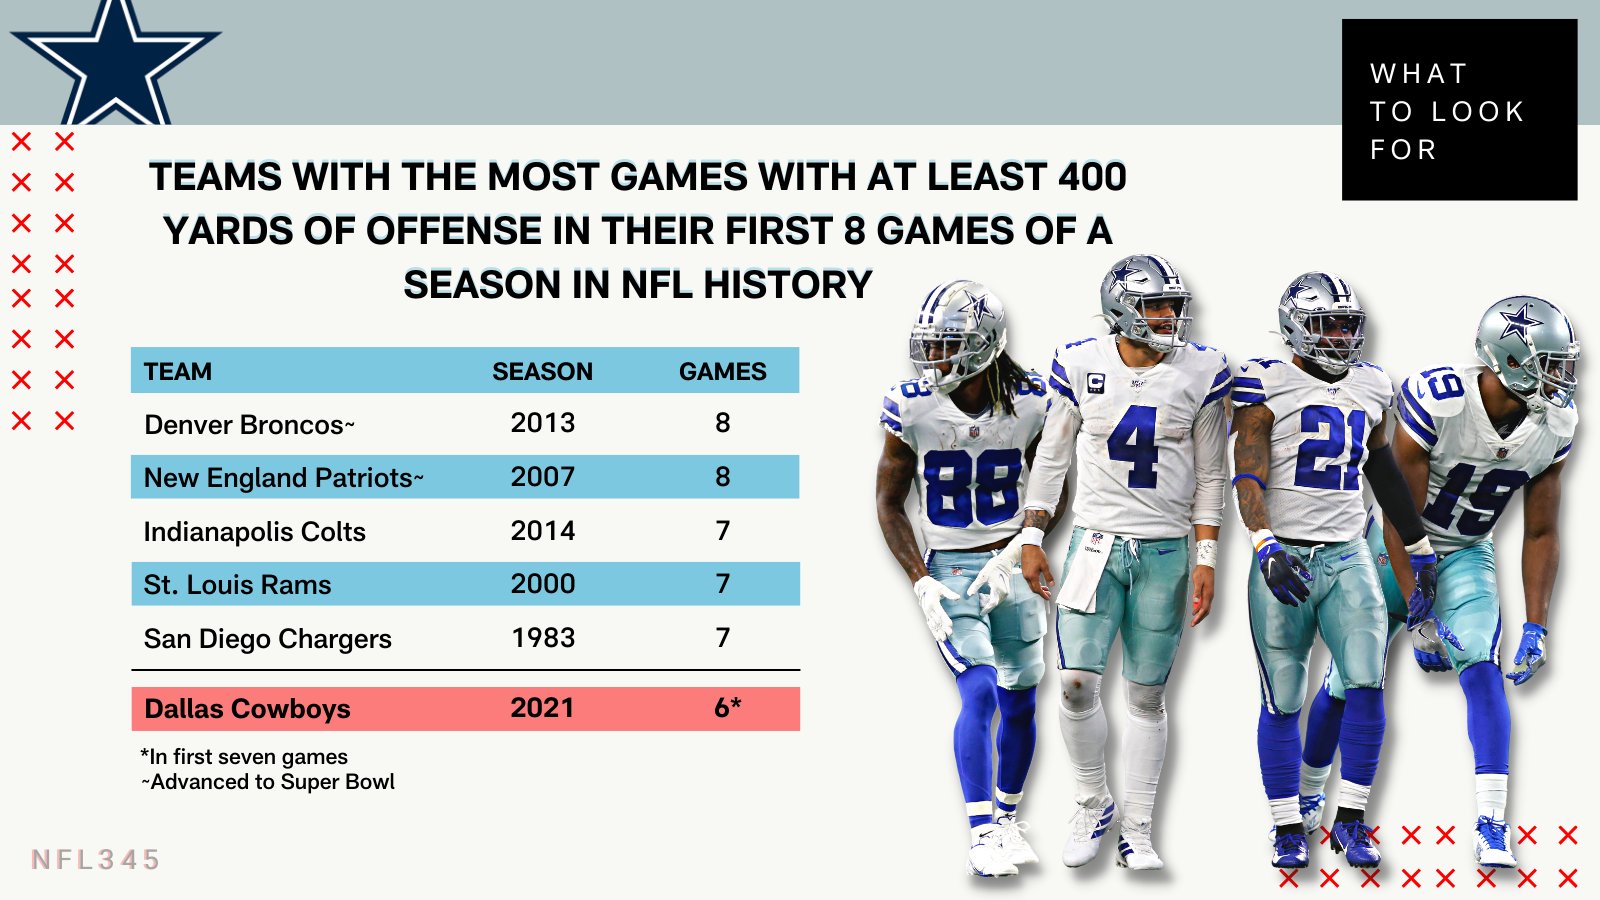 X \ NFL345 در X: «The @DallasCowboys currently lead the @NFL in